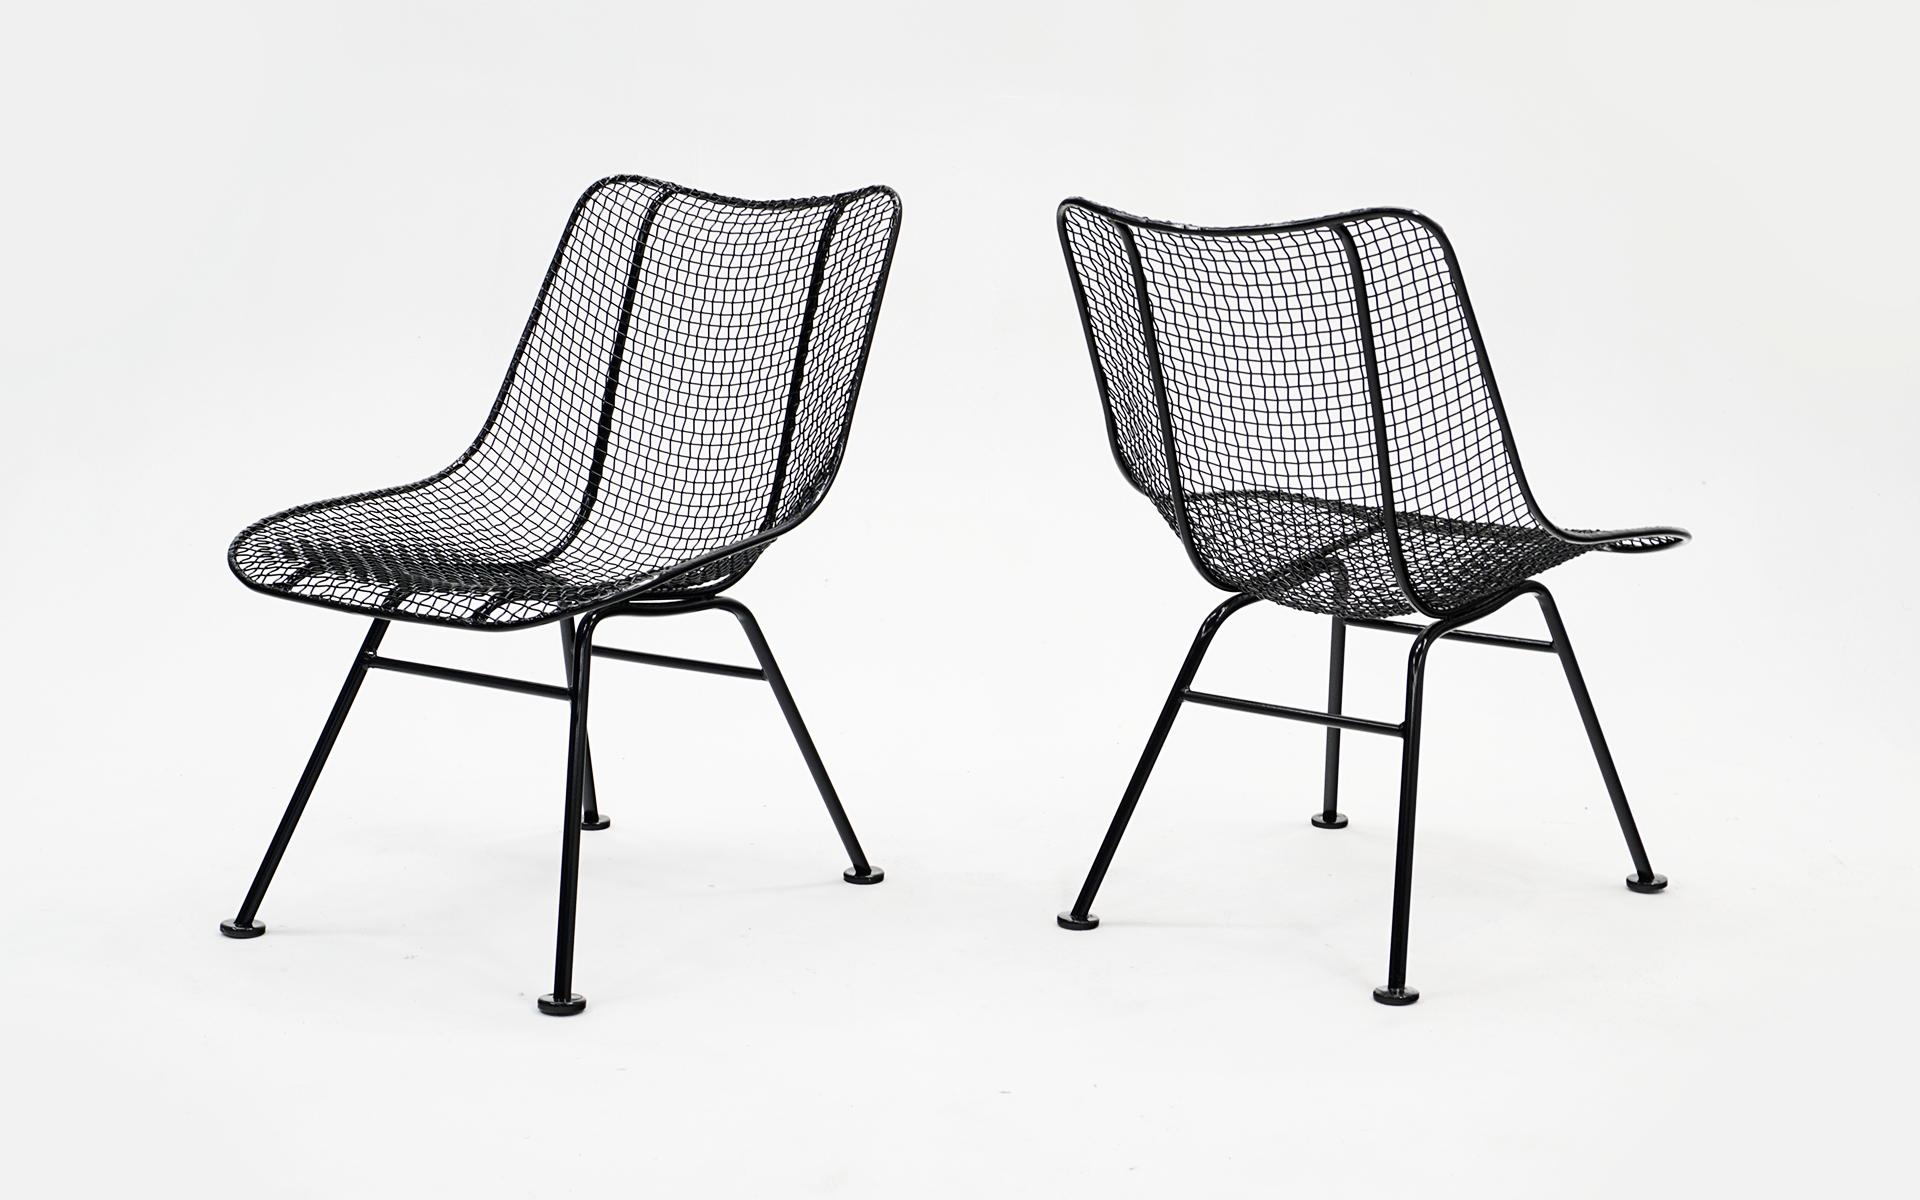 Two Woodard Sculptura armless dining chairs. Professionally media blasted and powder coated in a satin black finish. Woven wire and wrought iron construction. Designed by John Woodard and ofter misattributed to Russell Woodard.